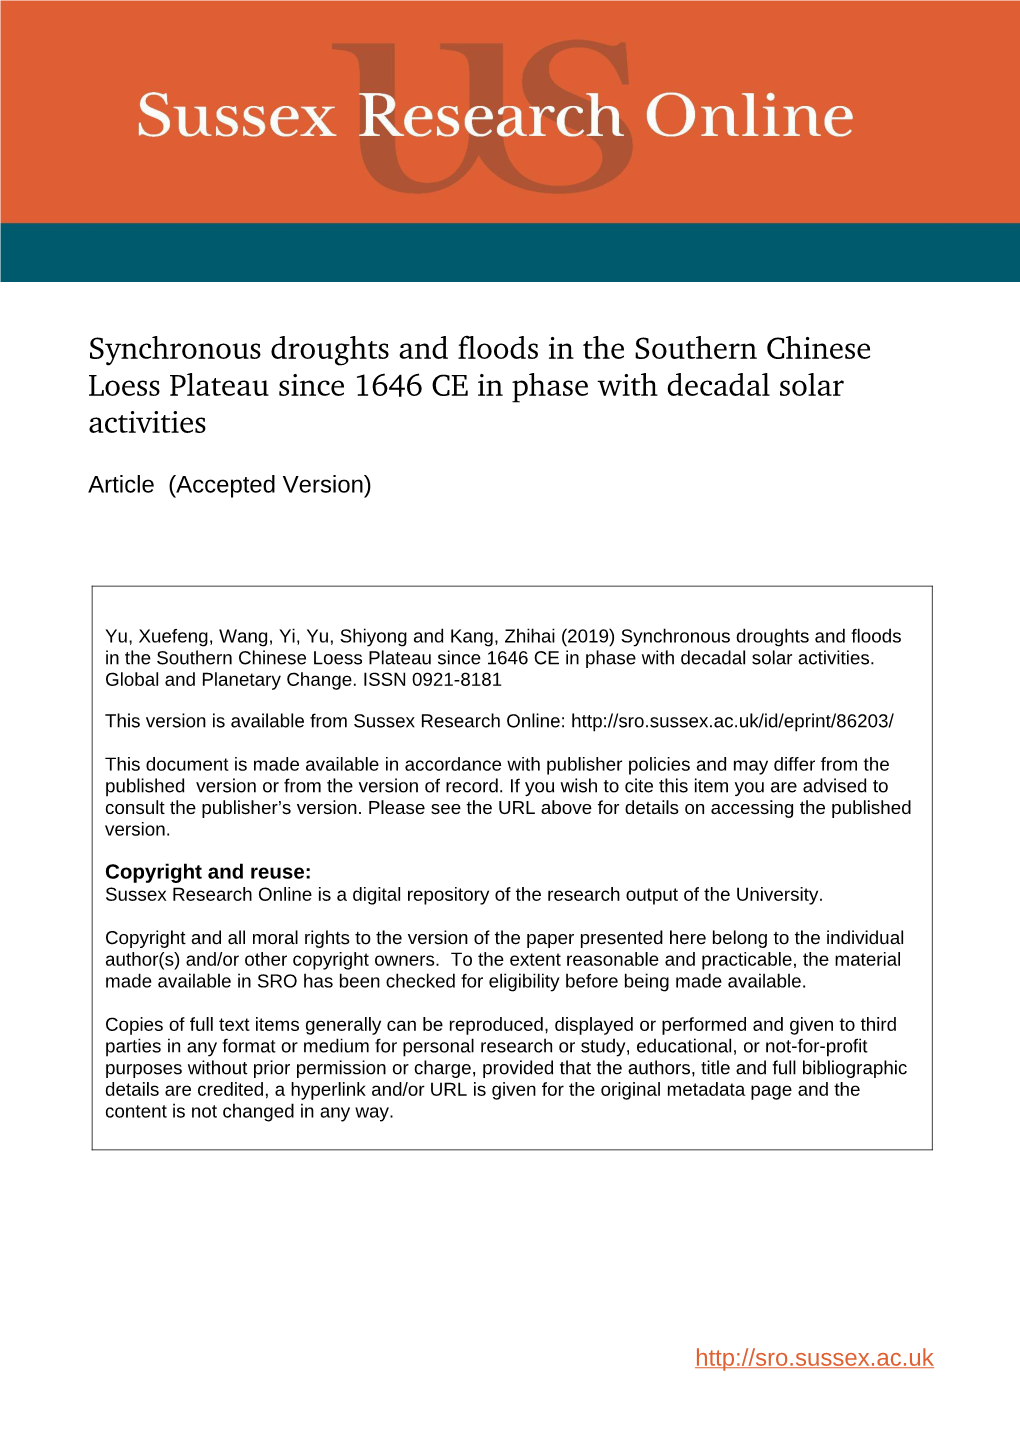 Synchronous Droughts and Floods in the Southern Chinese Loess Plateau Since 1646 CE in Phase with Decadal Solar Activities